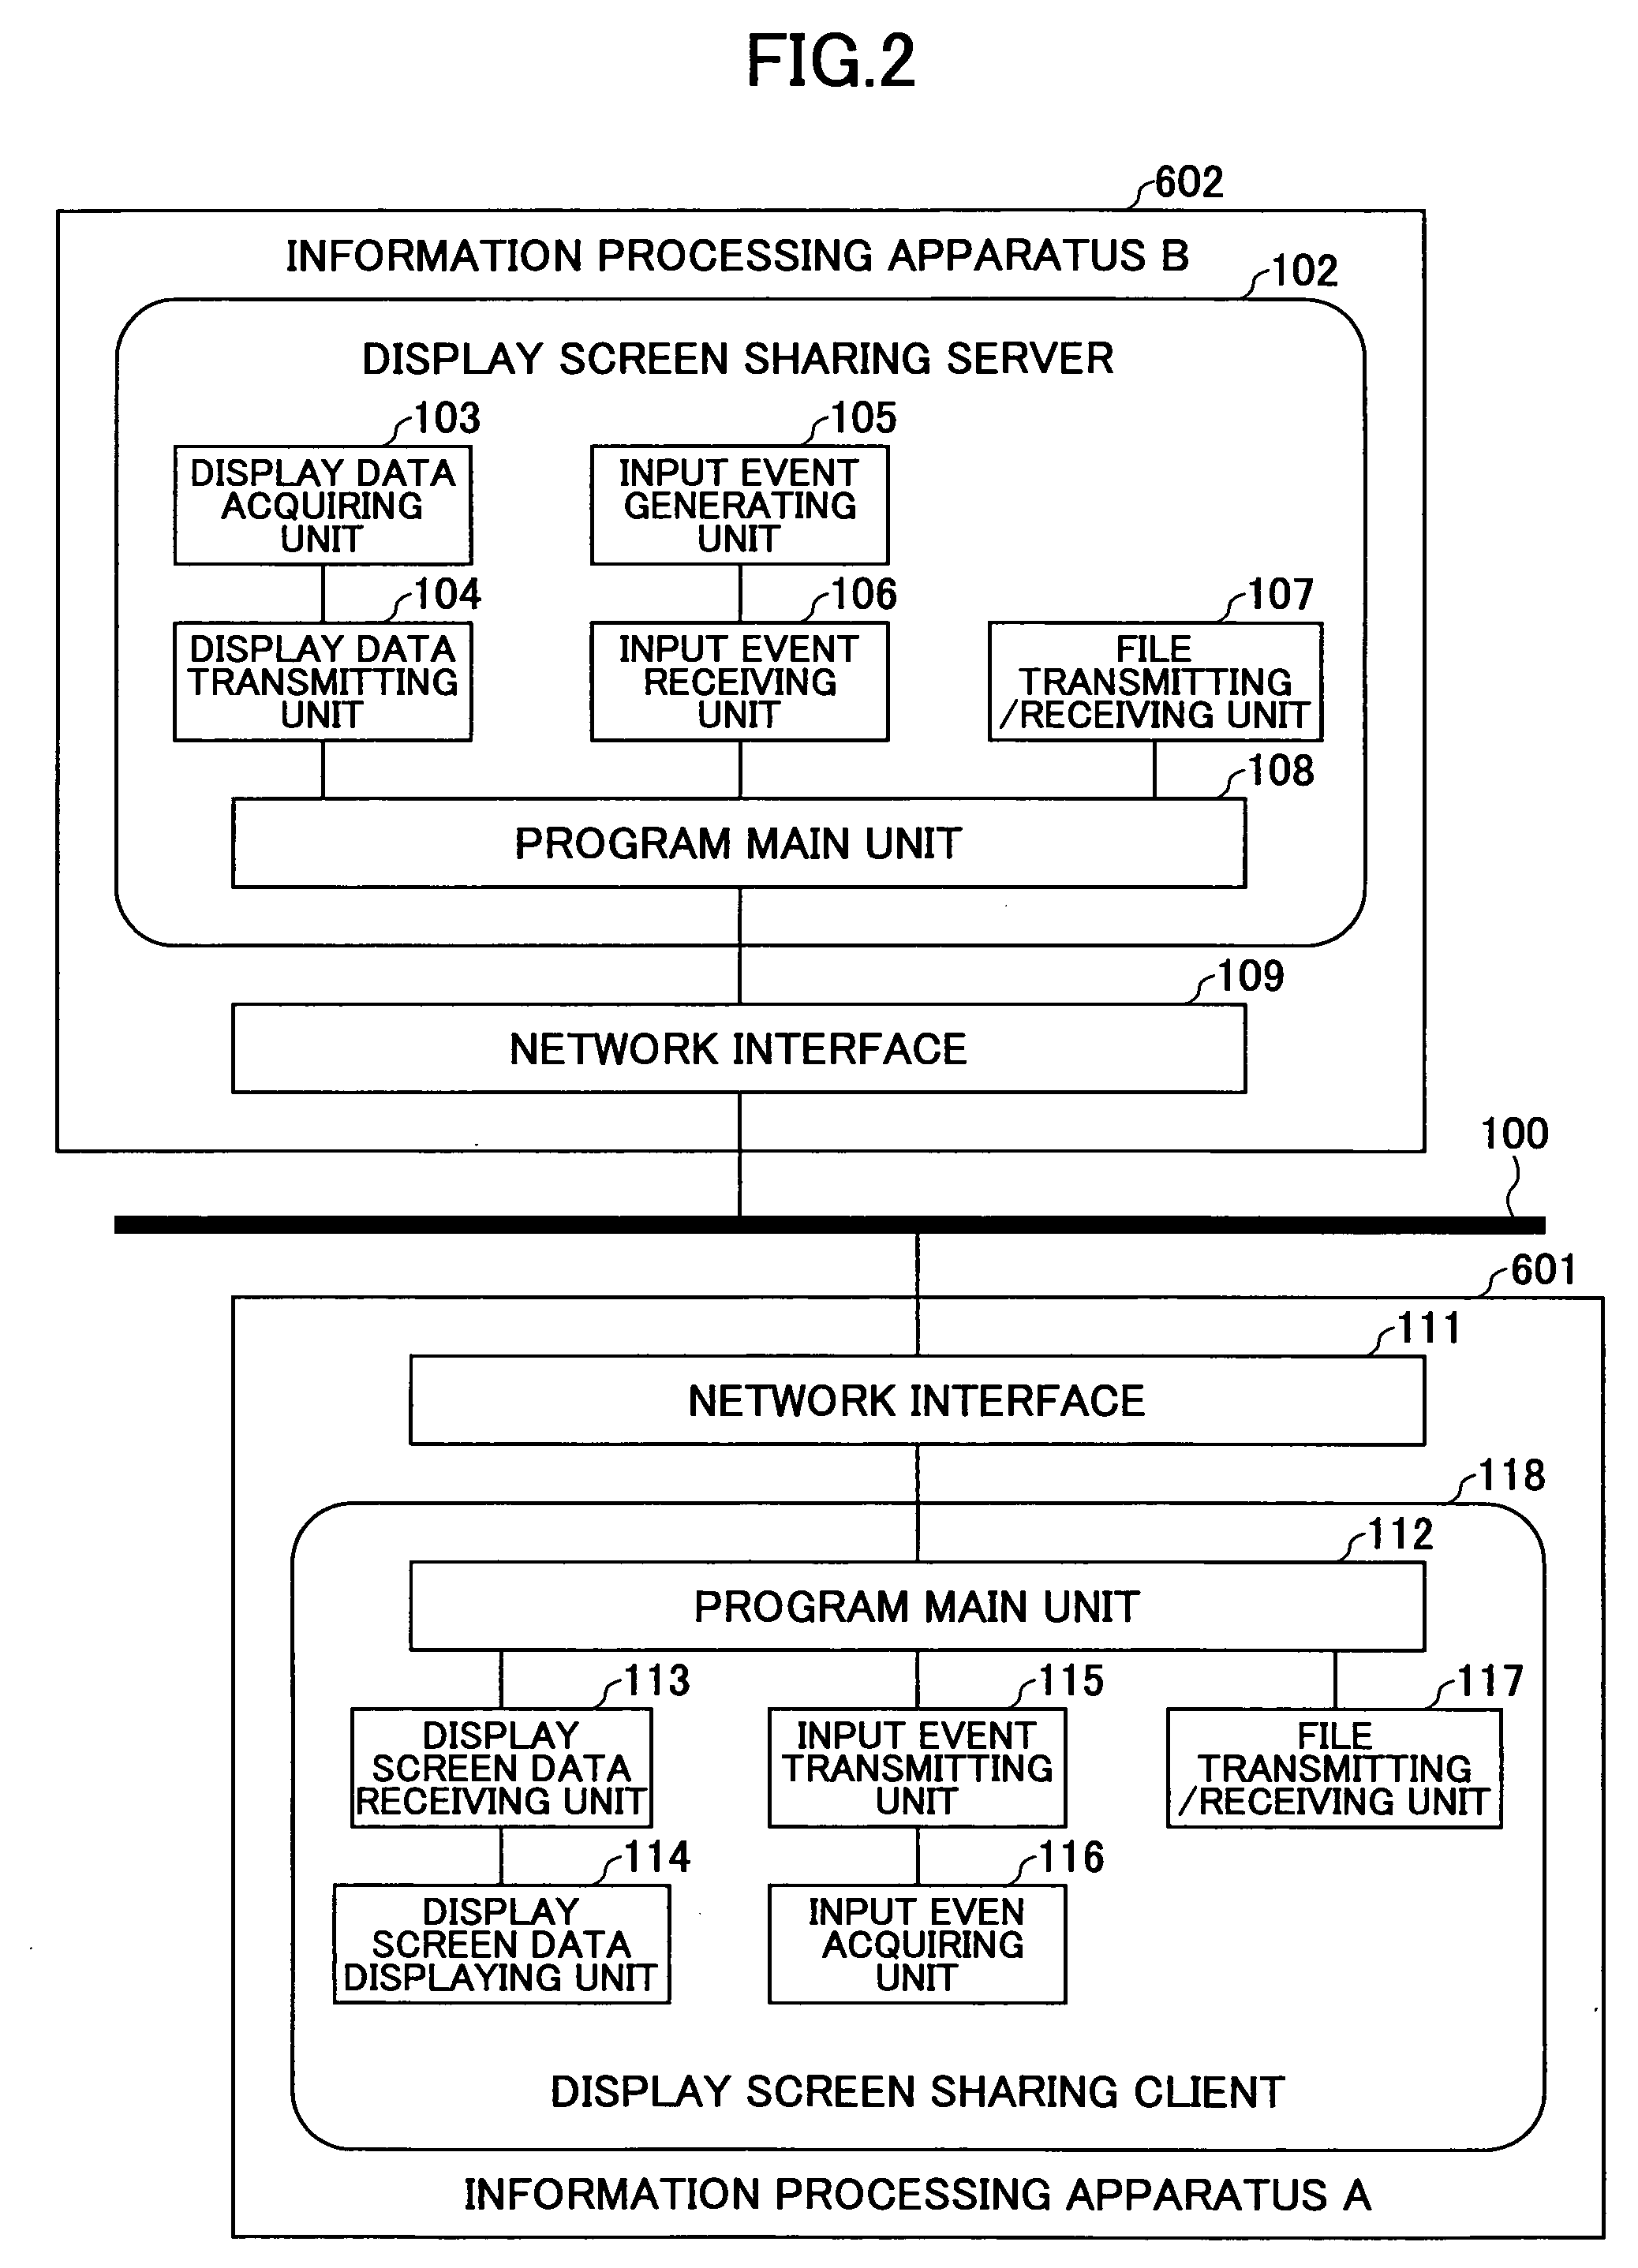 System and method for sharing display screen between information processing apparatuses